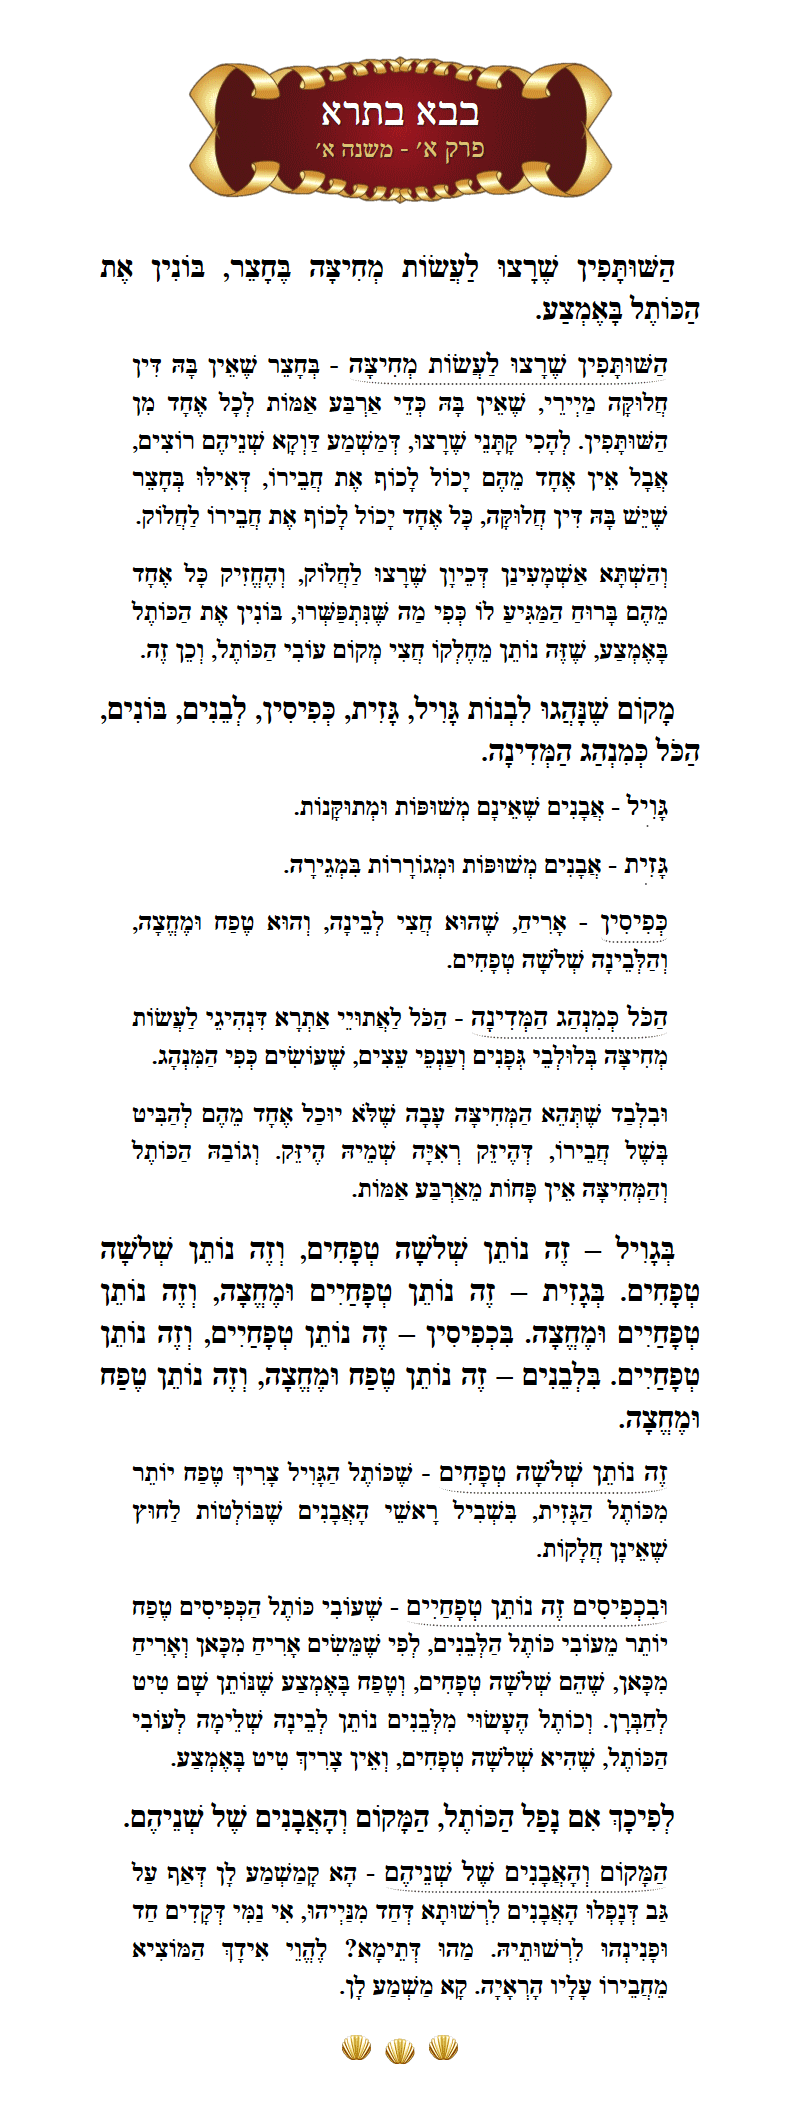 Masechta Bava Basra Chapter 1 Mishnah 1 with commentary